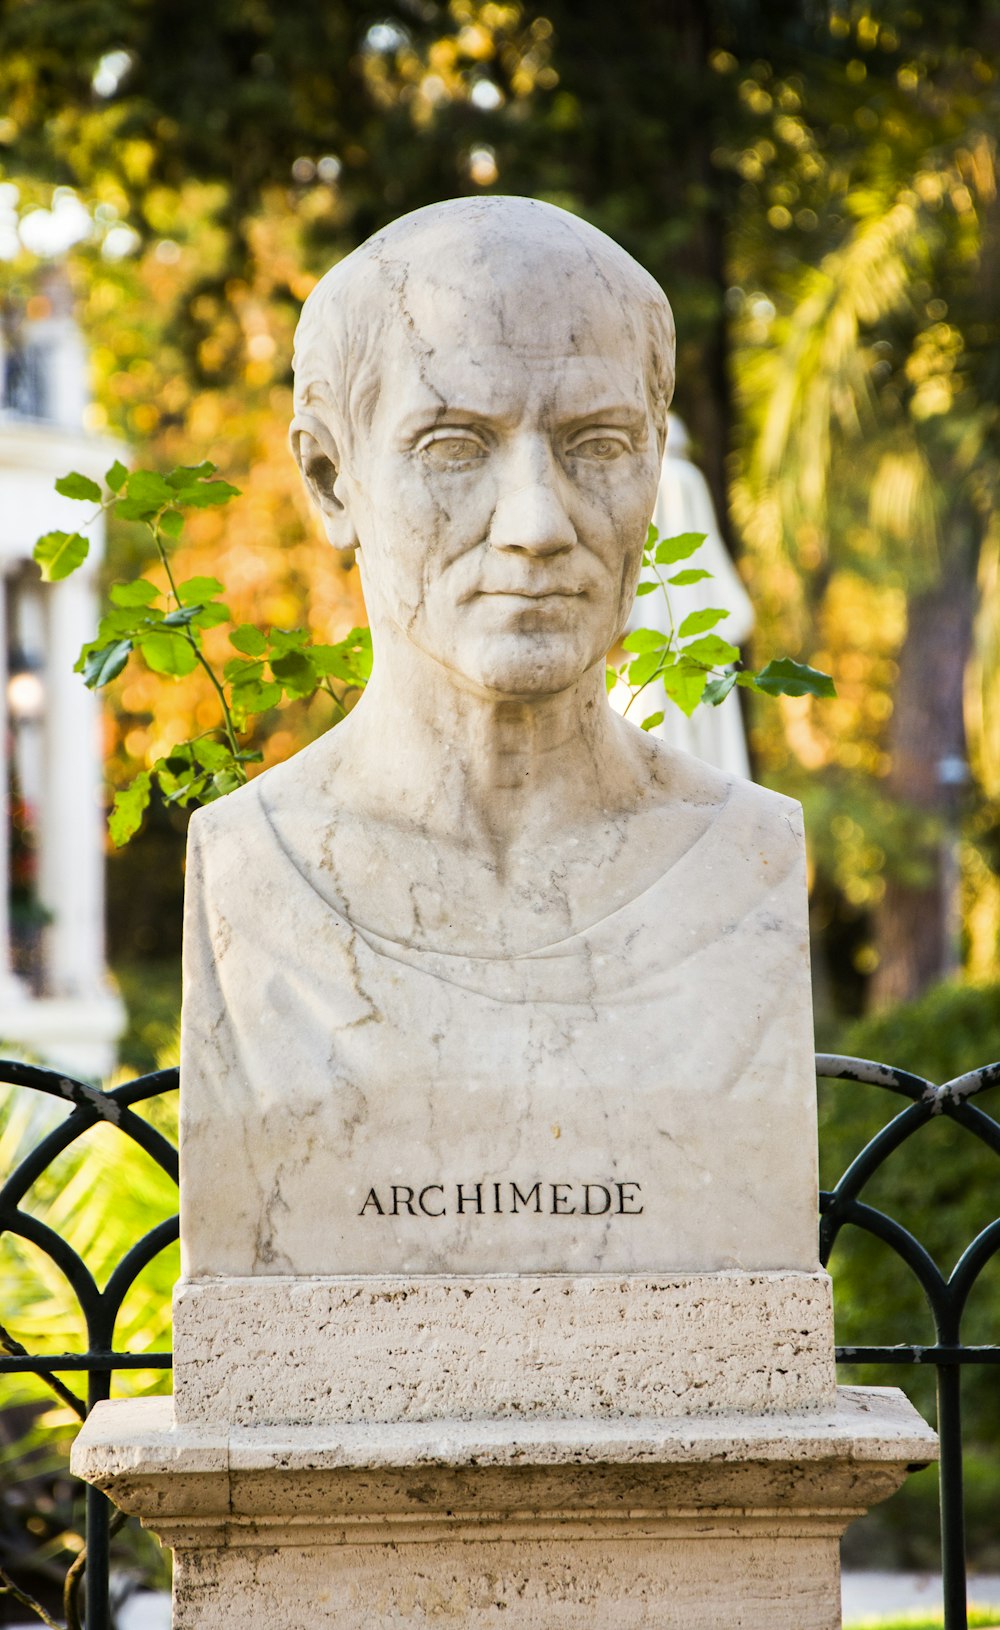 Archimede bust